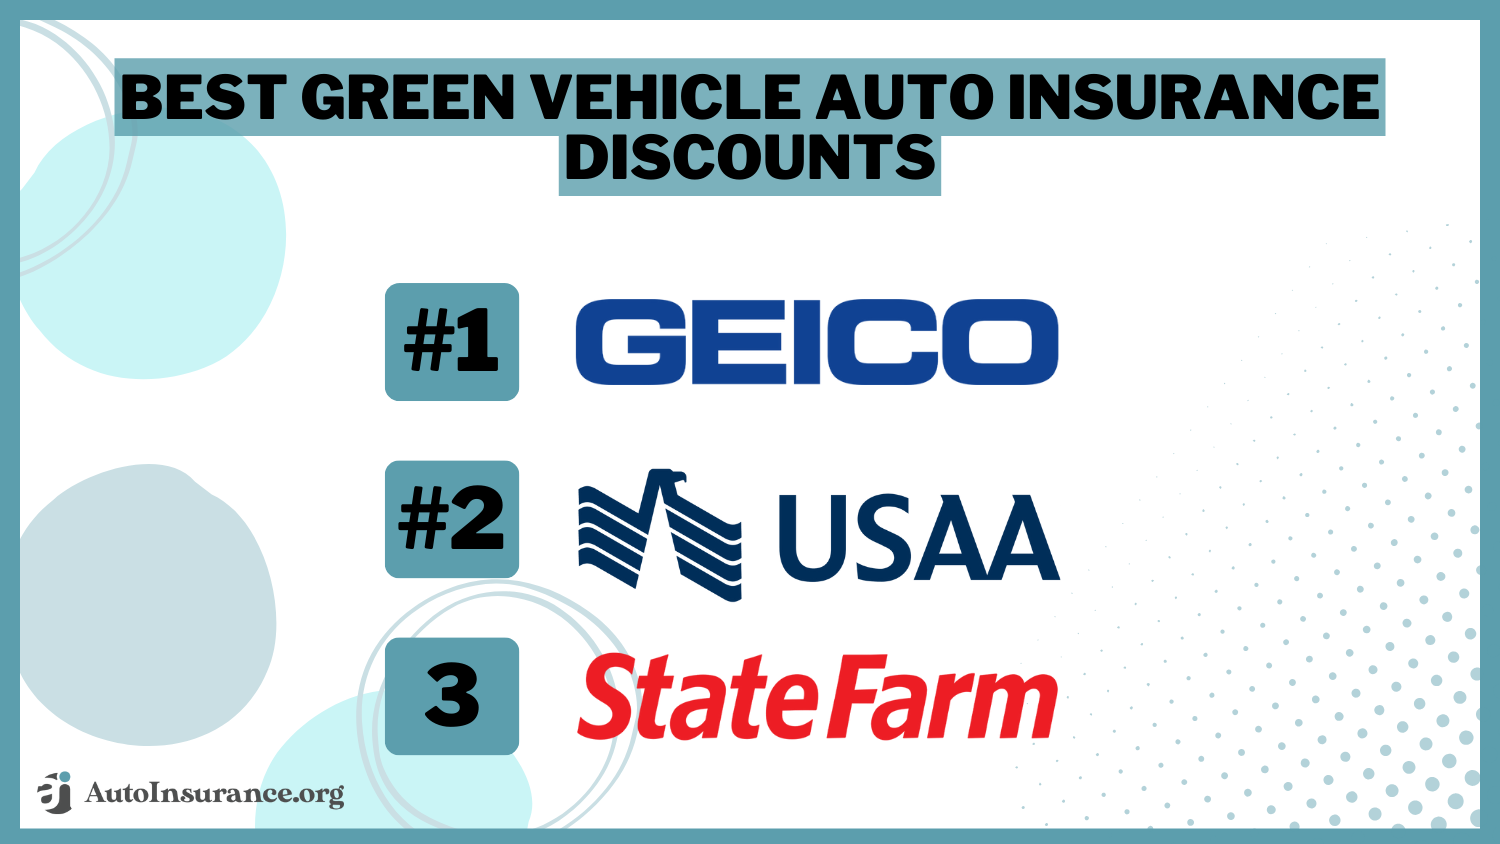 Best Green Vehicle Auto Insurance Discounts: Geico, USAA, and State Farm.